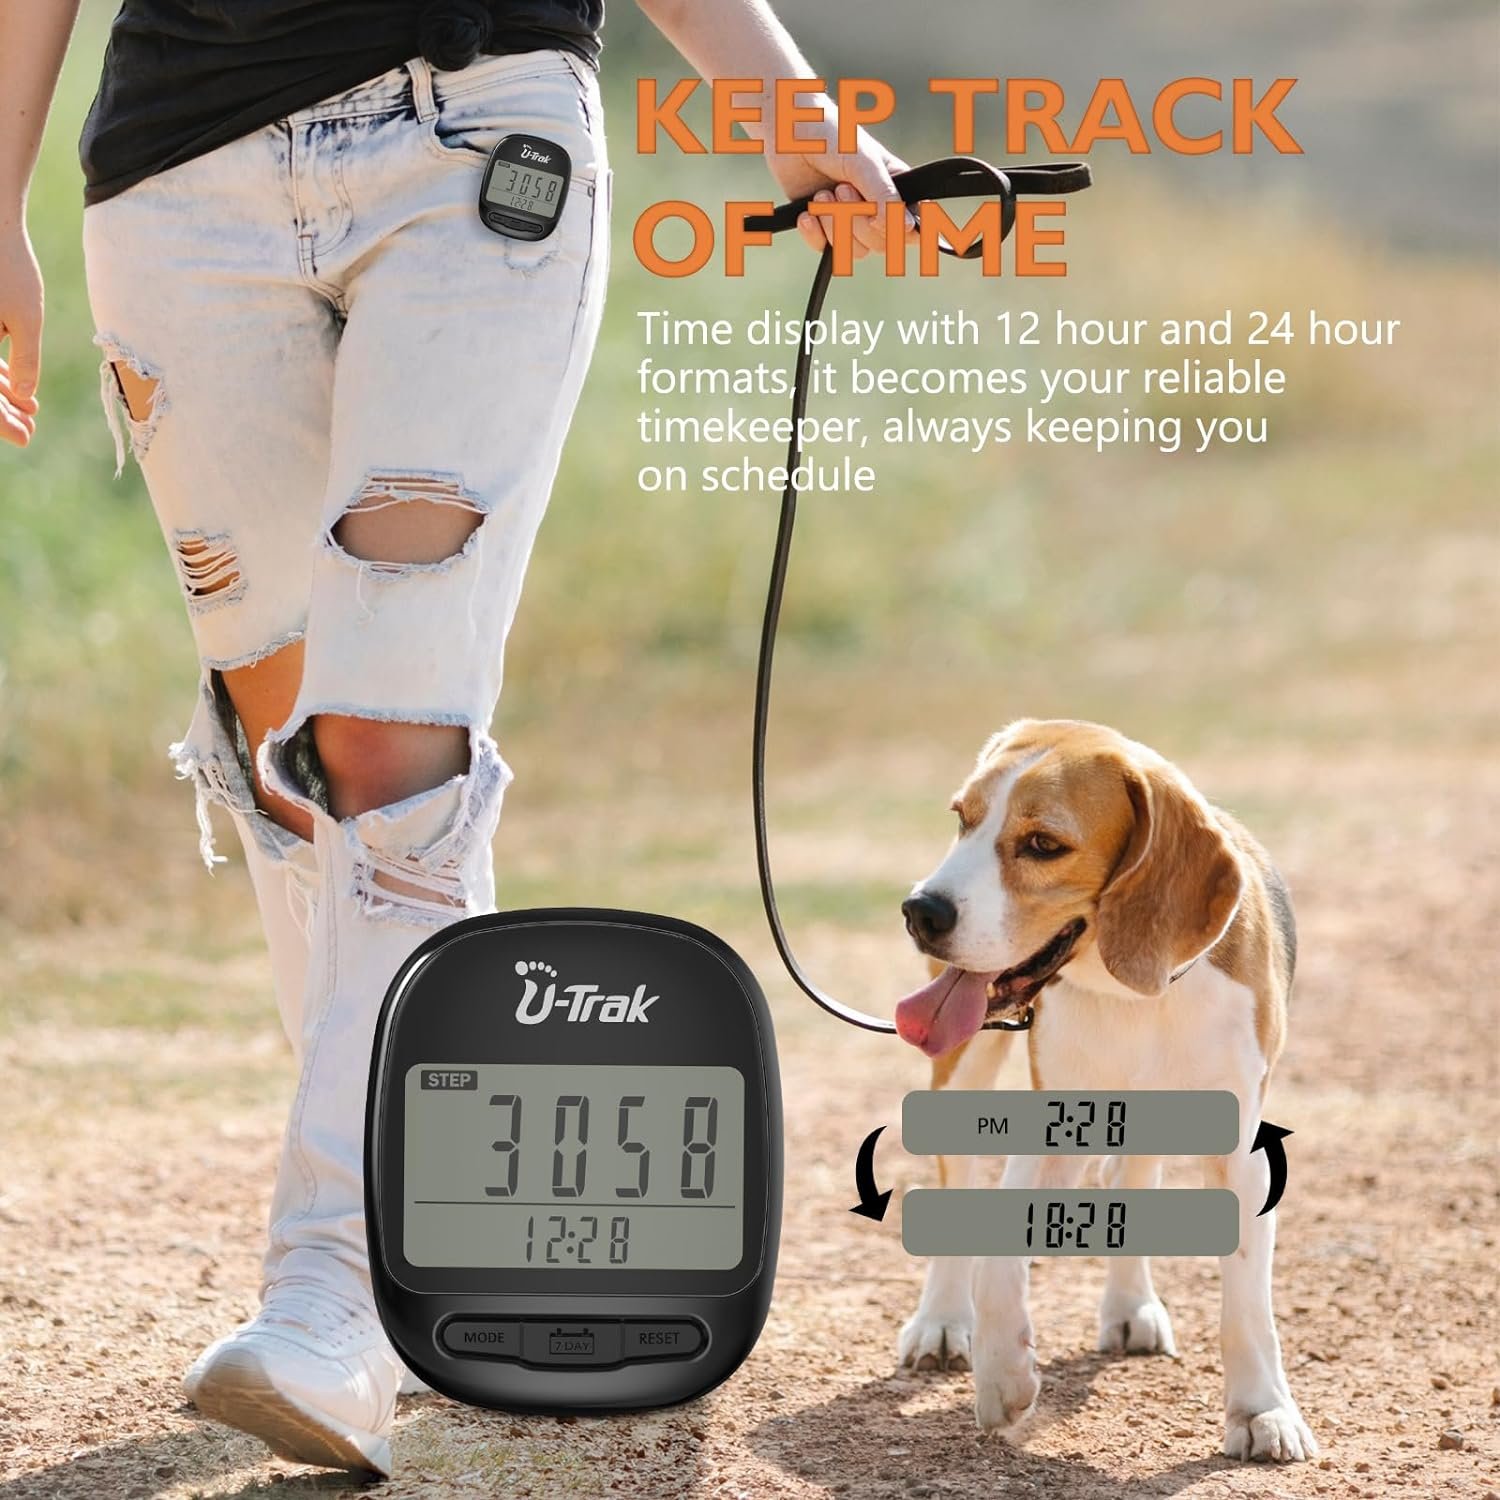 U-Trak Pedometer for Walking Simple Step Counter Accurate Step Tracker Pedometer Clip On with 7 Days Memory Distance Miles/Km, Calorie Counter, Clock, Exercise Time for Men Women Kids Seniors Black